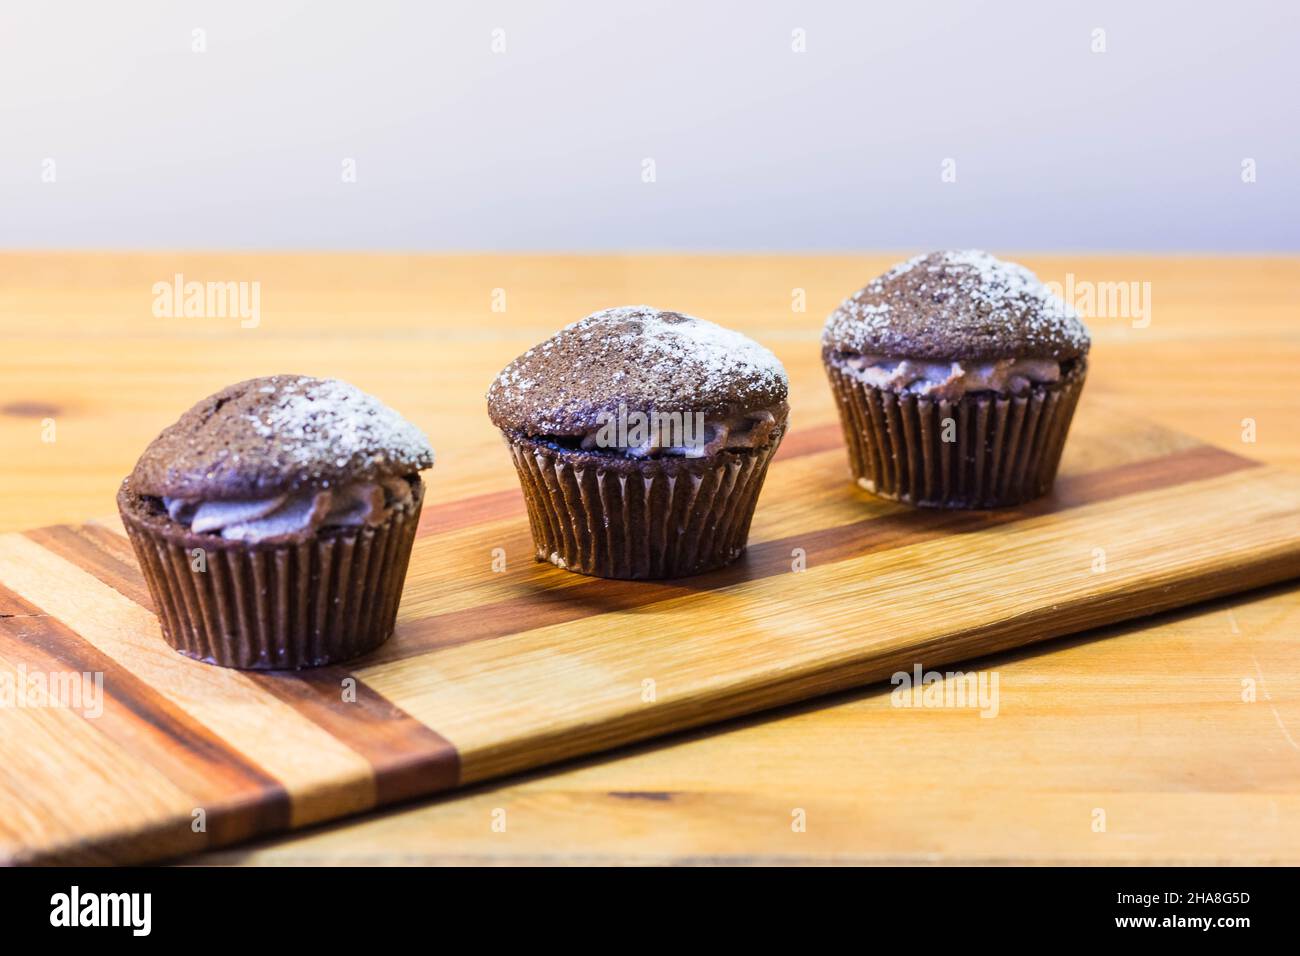 Three Chocolate Victoria Sponge Mini Cup Cakes Filled with Cocoa Cream and Dusted with Sugar on Cherry Wooden Board Stock Photo